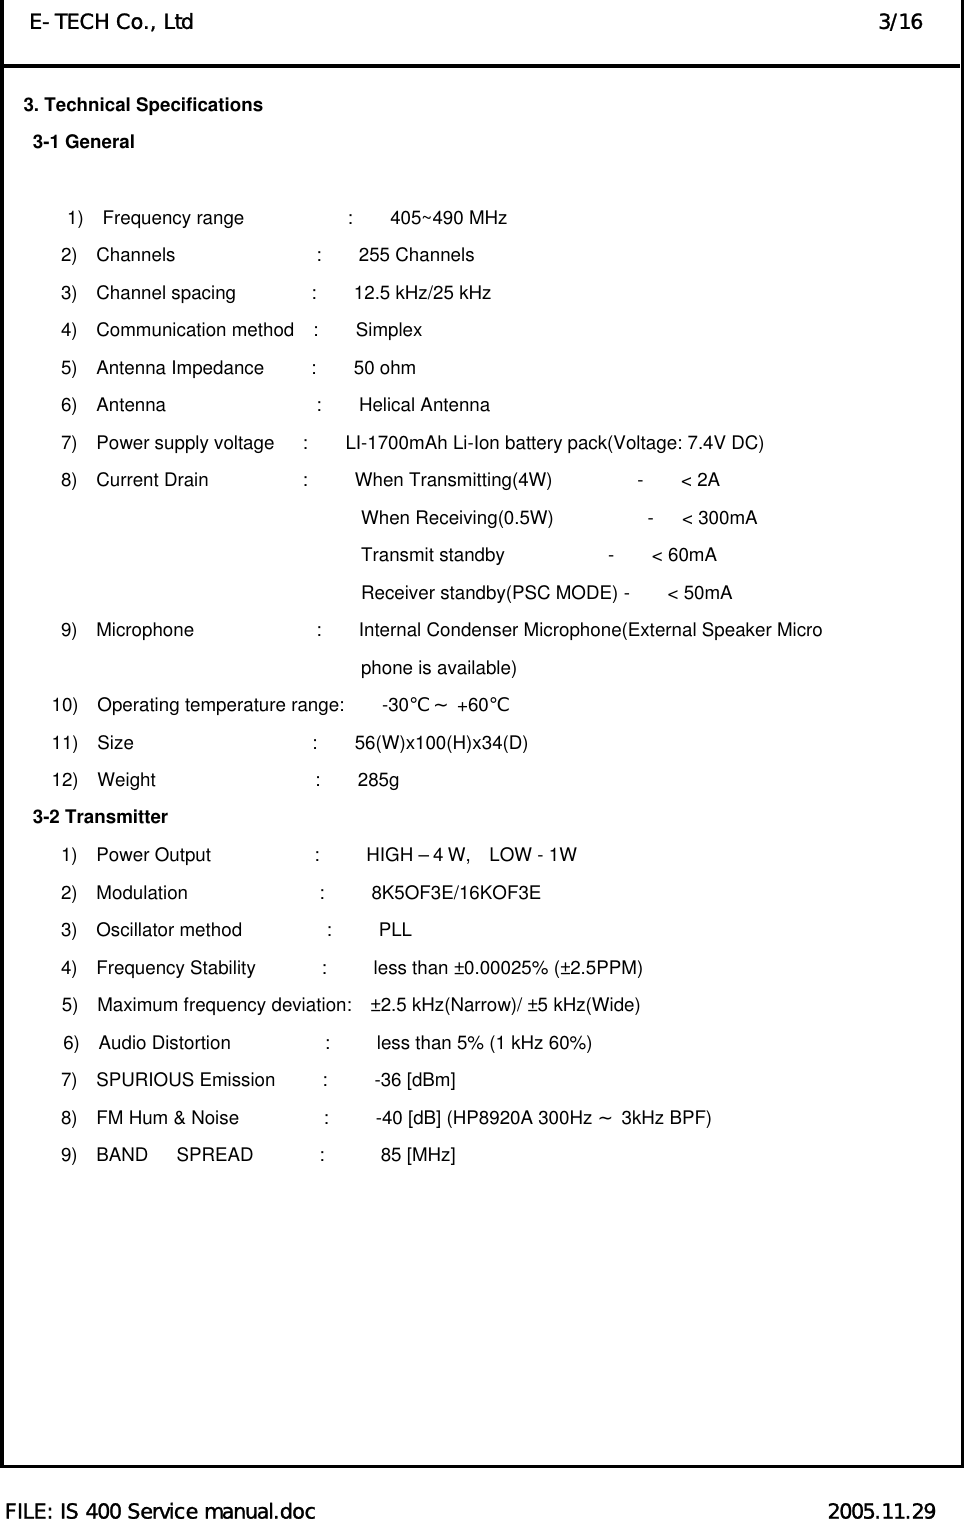  FILE: IS 400 Service manual.doc                                                  2005.11.29 E-TECH Co., Ltd                                                                   3/16 3. Technical Specifications    3-1 General          1)  Frequency range           :    405~490 MHz 2)  Channels               :    255 Channels 3)  Channel spacing        :    12.5 kHz/25 kHz 4)  Communication method  :    Simplex 5)  Antenna Impedance     :    50 ohm  6)  Antenna                :    Helical Antenna 7)  Power supply voltage   :    LI-1700mAh Li-Ion battery pack(Voltage: 7.4V DC) 8)  Current Drain          :     When Transmitting(4W)         -    &lt; 2A                                       When Receiving(0.5W)          -   &lt; 300mA                                       Transmit standby           -    &lt; 60mA                                       Receiver standby(PSC MODE) -    &lt; 50mA 9)  Microphone             :    Internal Condenser Microphone(External Speaker Micro                                 phone is available)       10)  Operating temperature range:    -30    +℃～ 60℃      11)  Size                   :    56(W)x100(H)x34(D)      12)  Weight                 :    285g    3-2 Transmitter       1)  Power Output           :     HIGH –4W,  LOW - 1W       2)  Modulation              :     8K5OF3E/16KOF3E       3)  Oscillator method         :     PLL       4)  Frequency Stability       :     less than ±0.00025% (±2.5PPM) 5)  Maximum frequency deviation:  ±2.5 kHz(Narrow)/ ±5 kHz(Wide) 6)  Audio Distortion          :     less than 5% (1 kHz 60%)       7)  SPURIOUS Emission     :     -36 [dBm]       8)  FM Hum &amp; Noise         :     -40 [dB] (HP8920A 300Hz   3kHz BP～F)        9)  BAND   SPREAD       :      85 [MHz]         